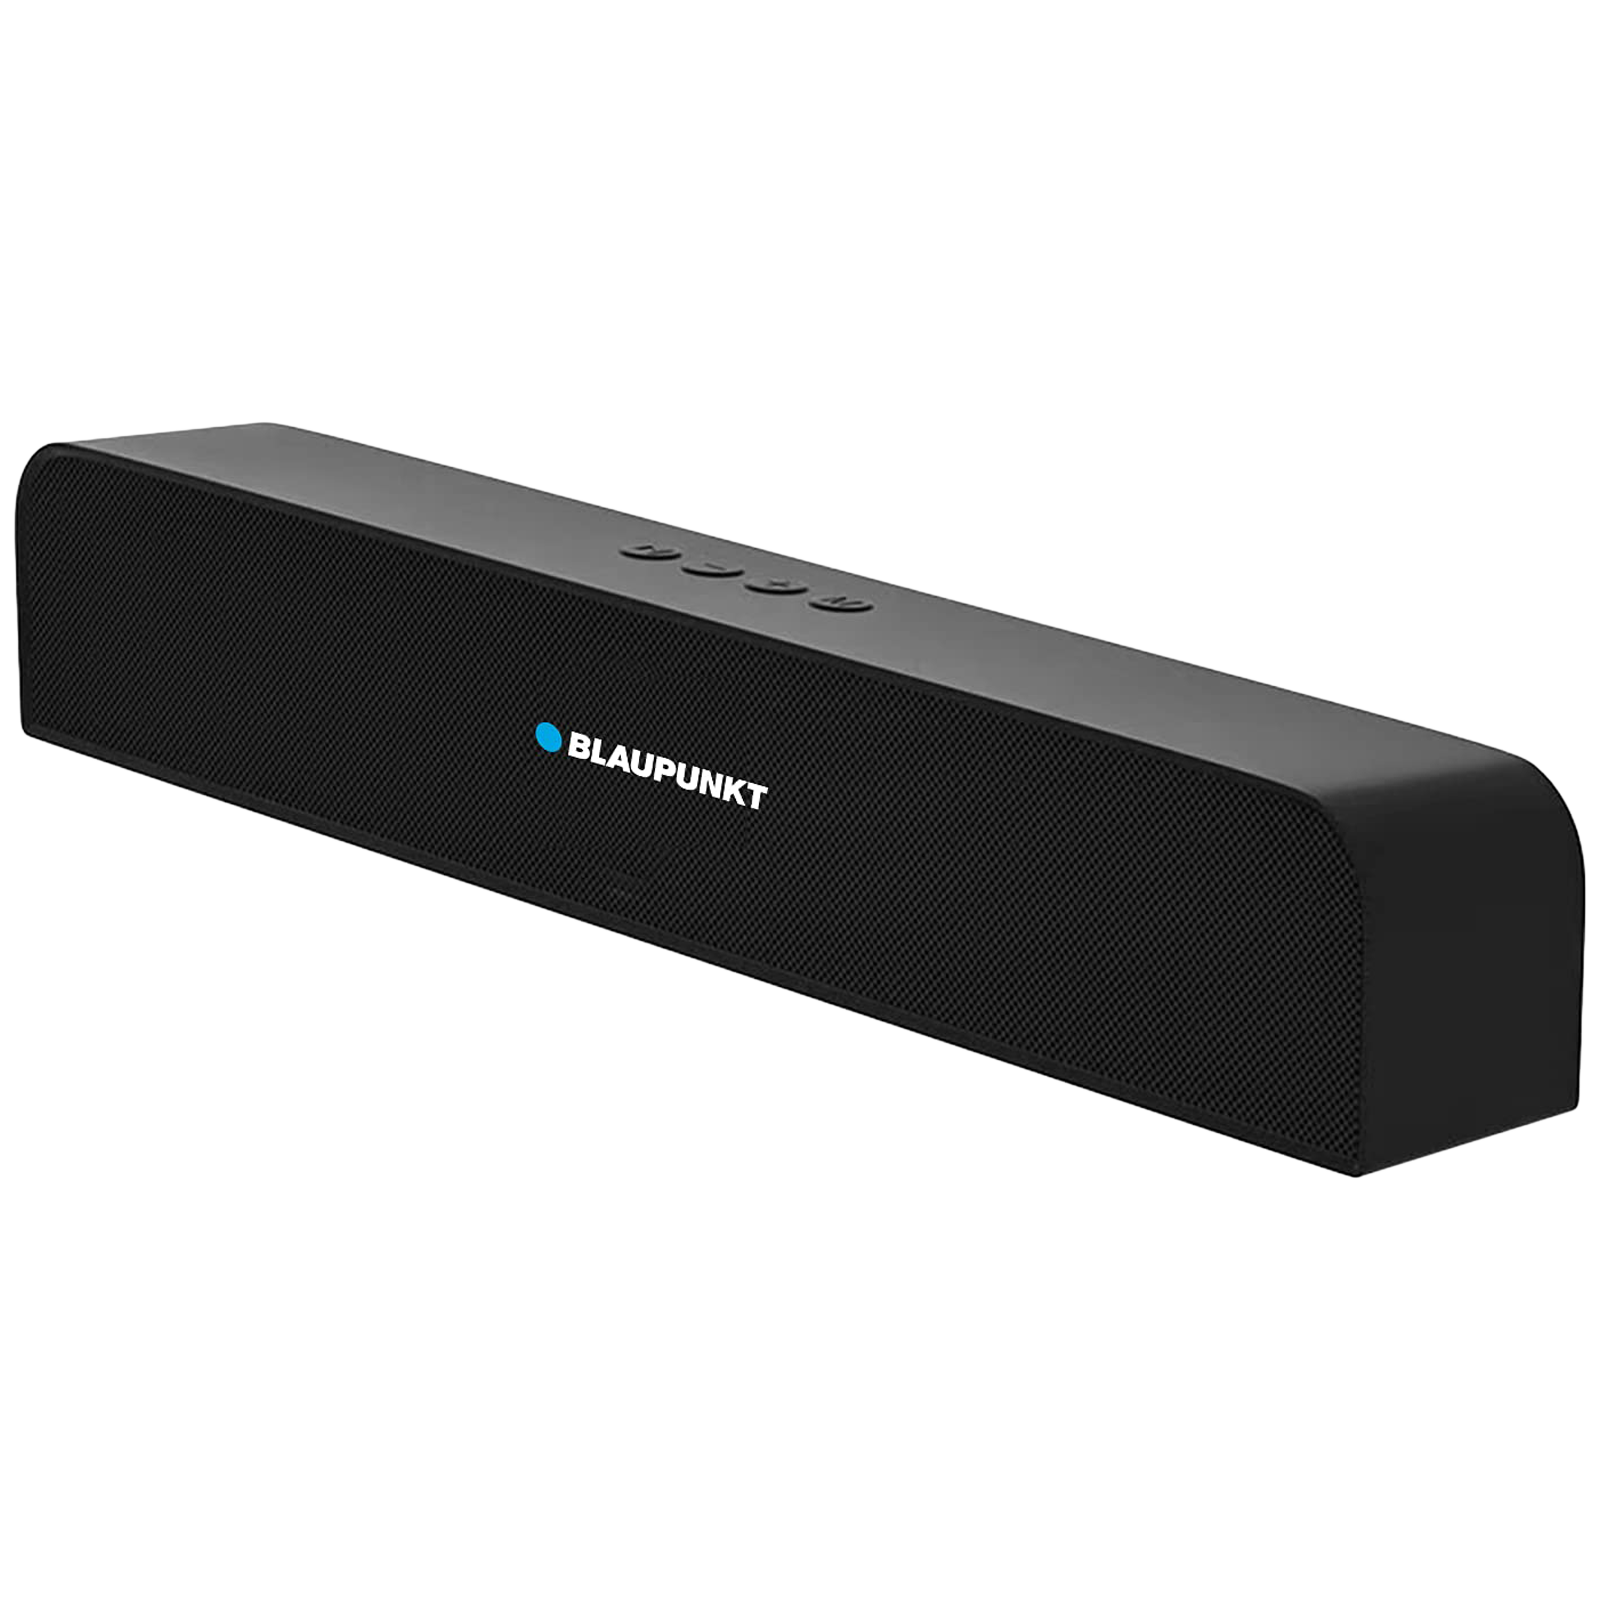 Buy Deep Bass Bluetooth Speakers Online at Best Prices